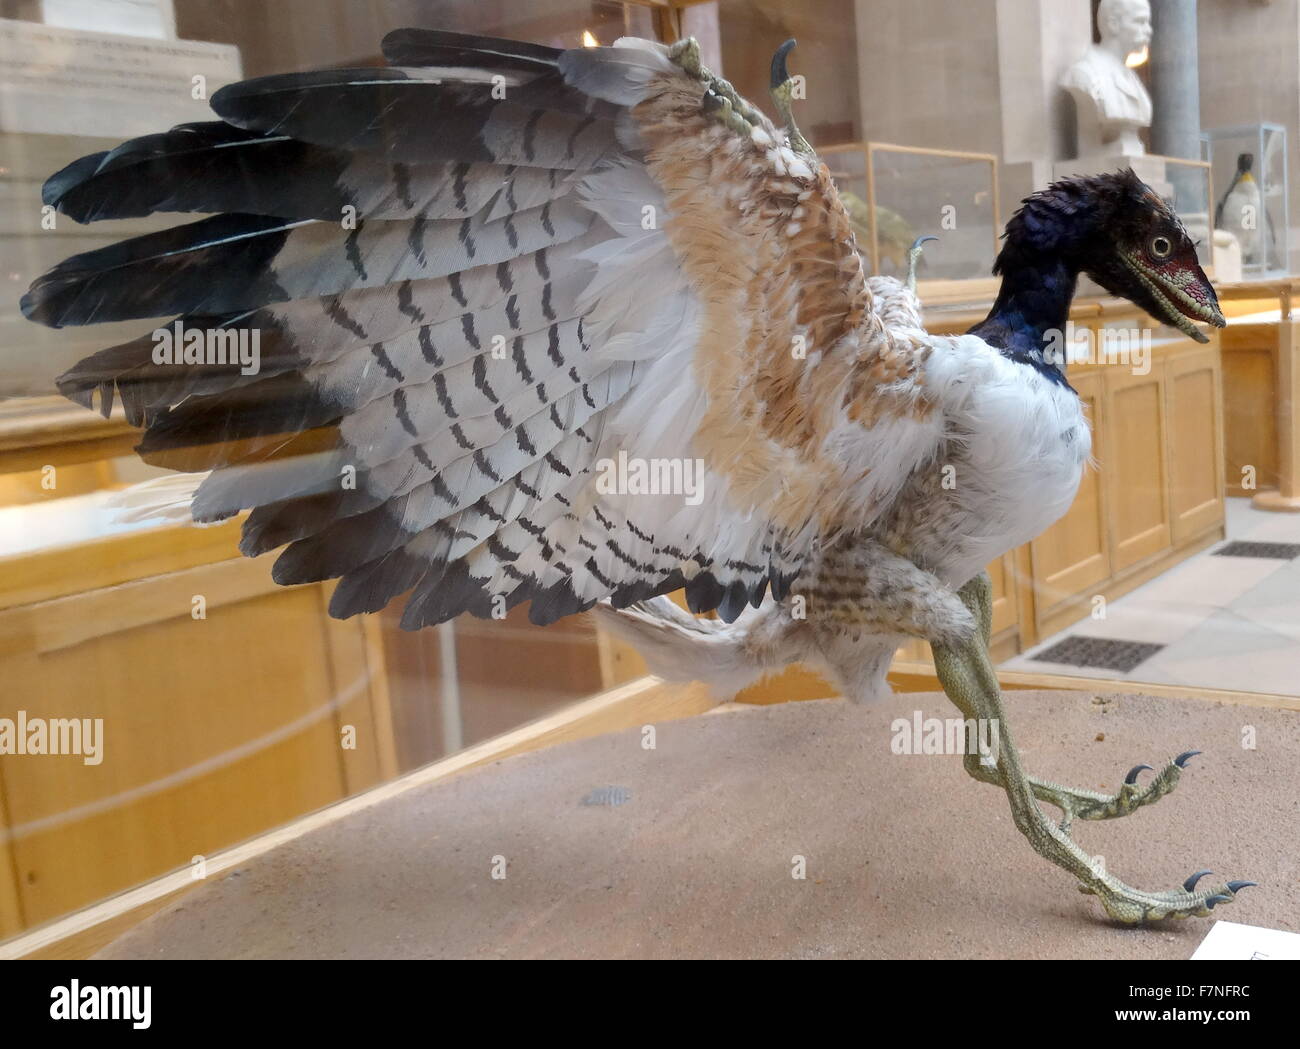 Model of Archaeopteryx a genus of bird-like dinosaurs that is transitional between non-avian feathered dinosaurs and modern birds. Stock Photo